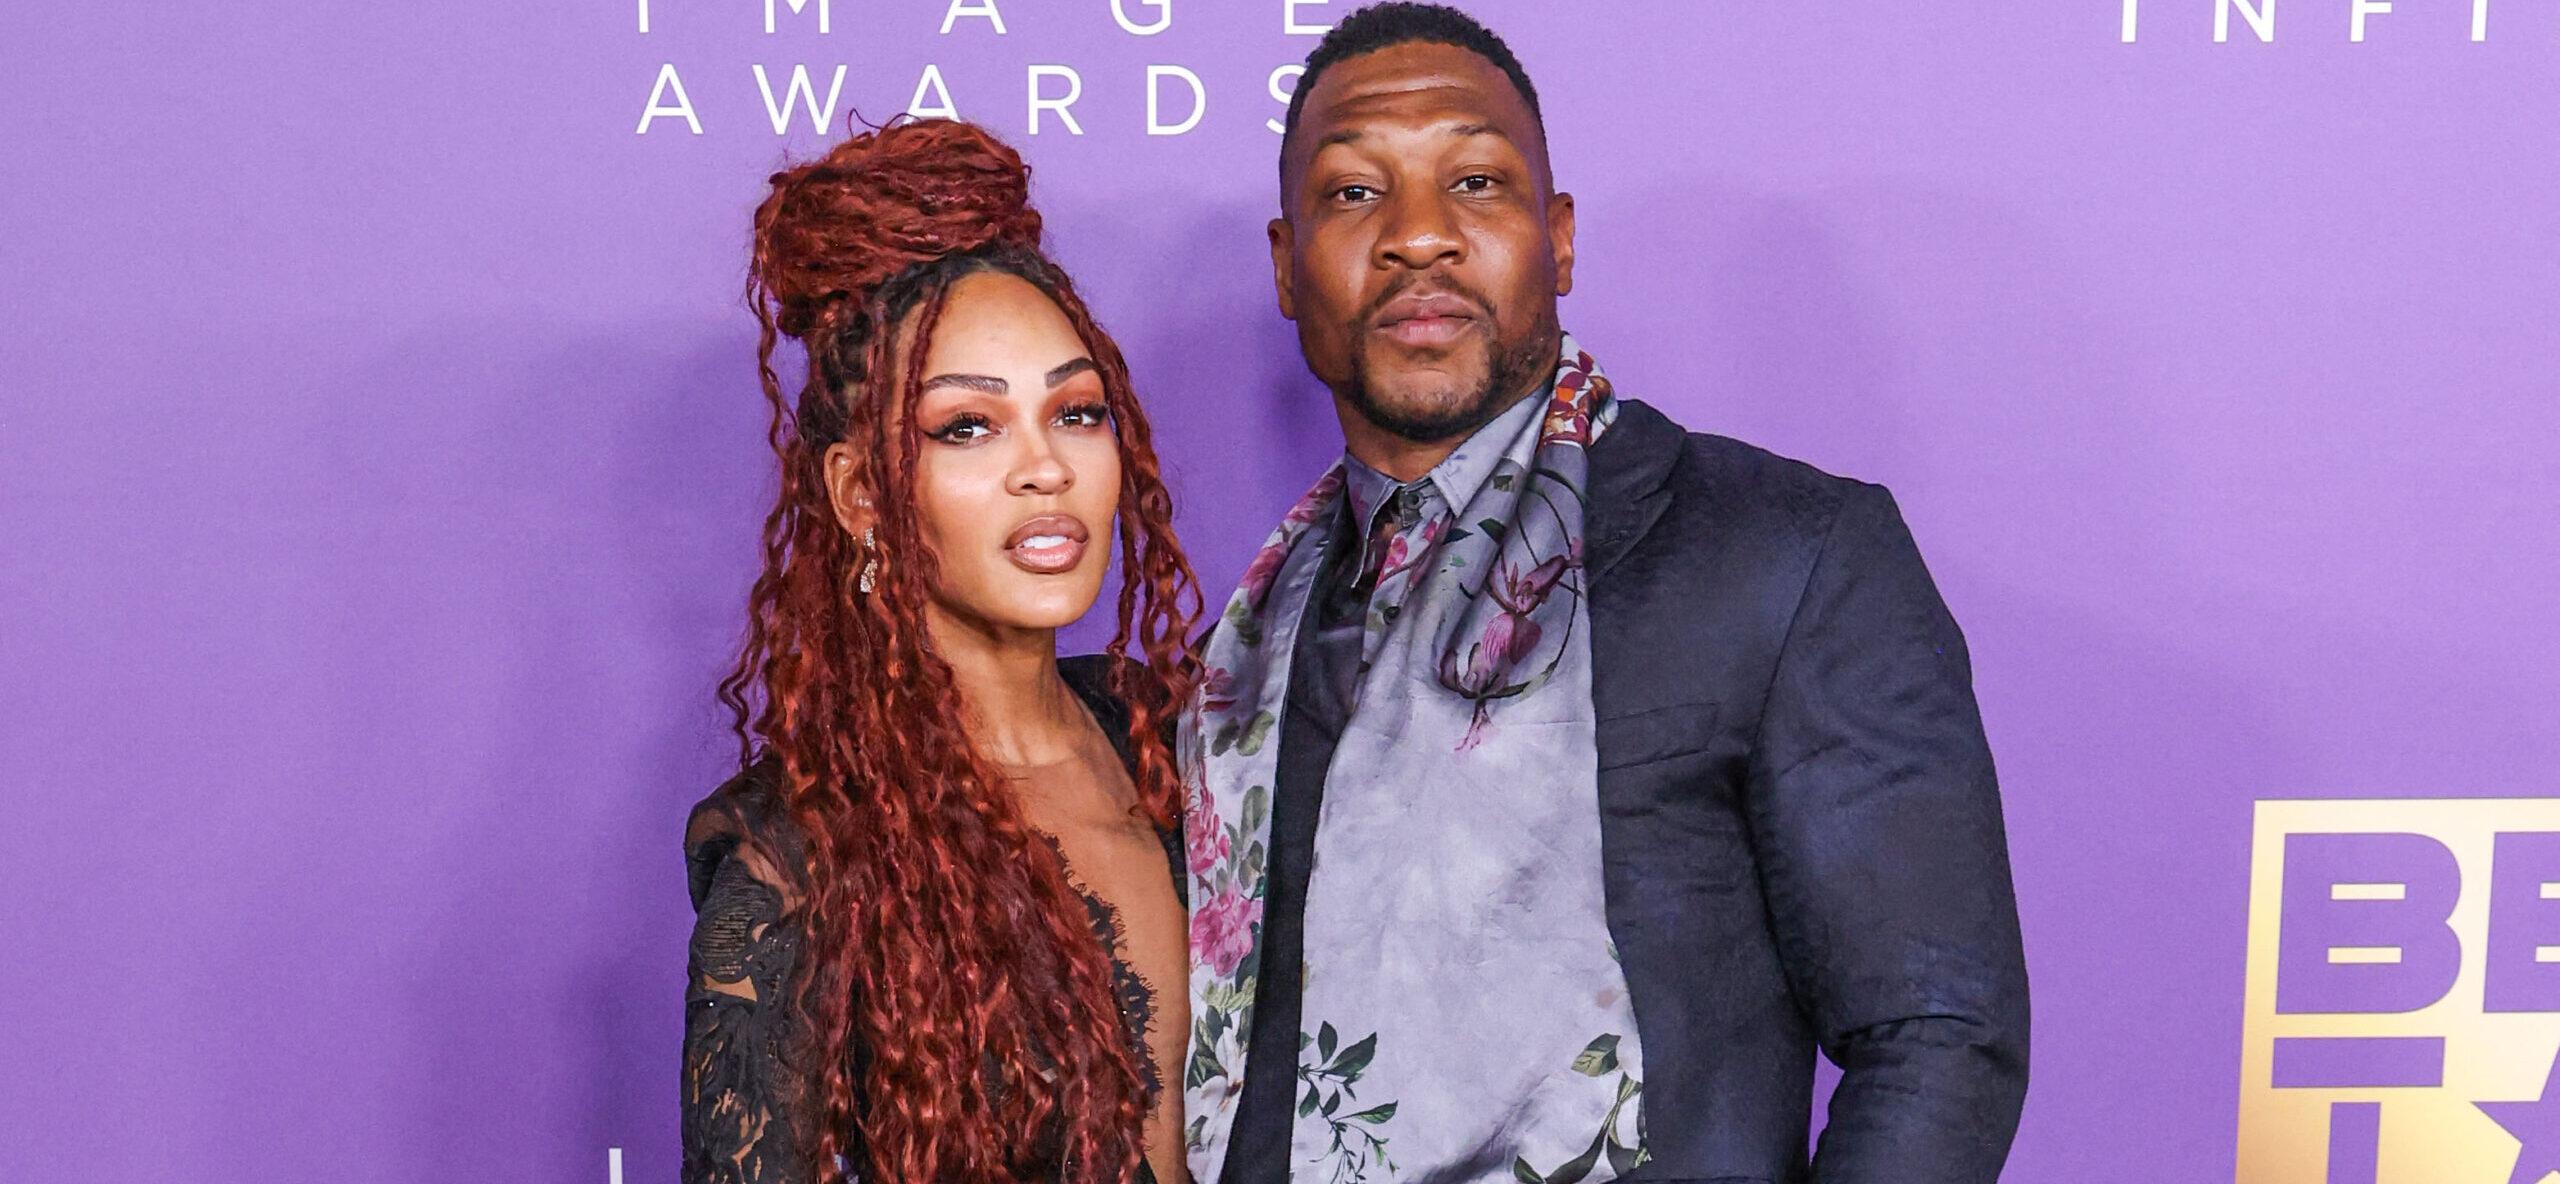 Jonathan Majors' GF Meagan Good Reveals How She Has Coped With His Legal Crisis